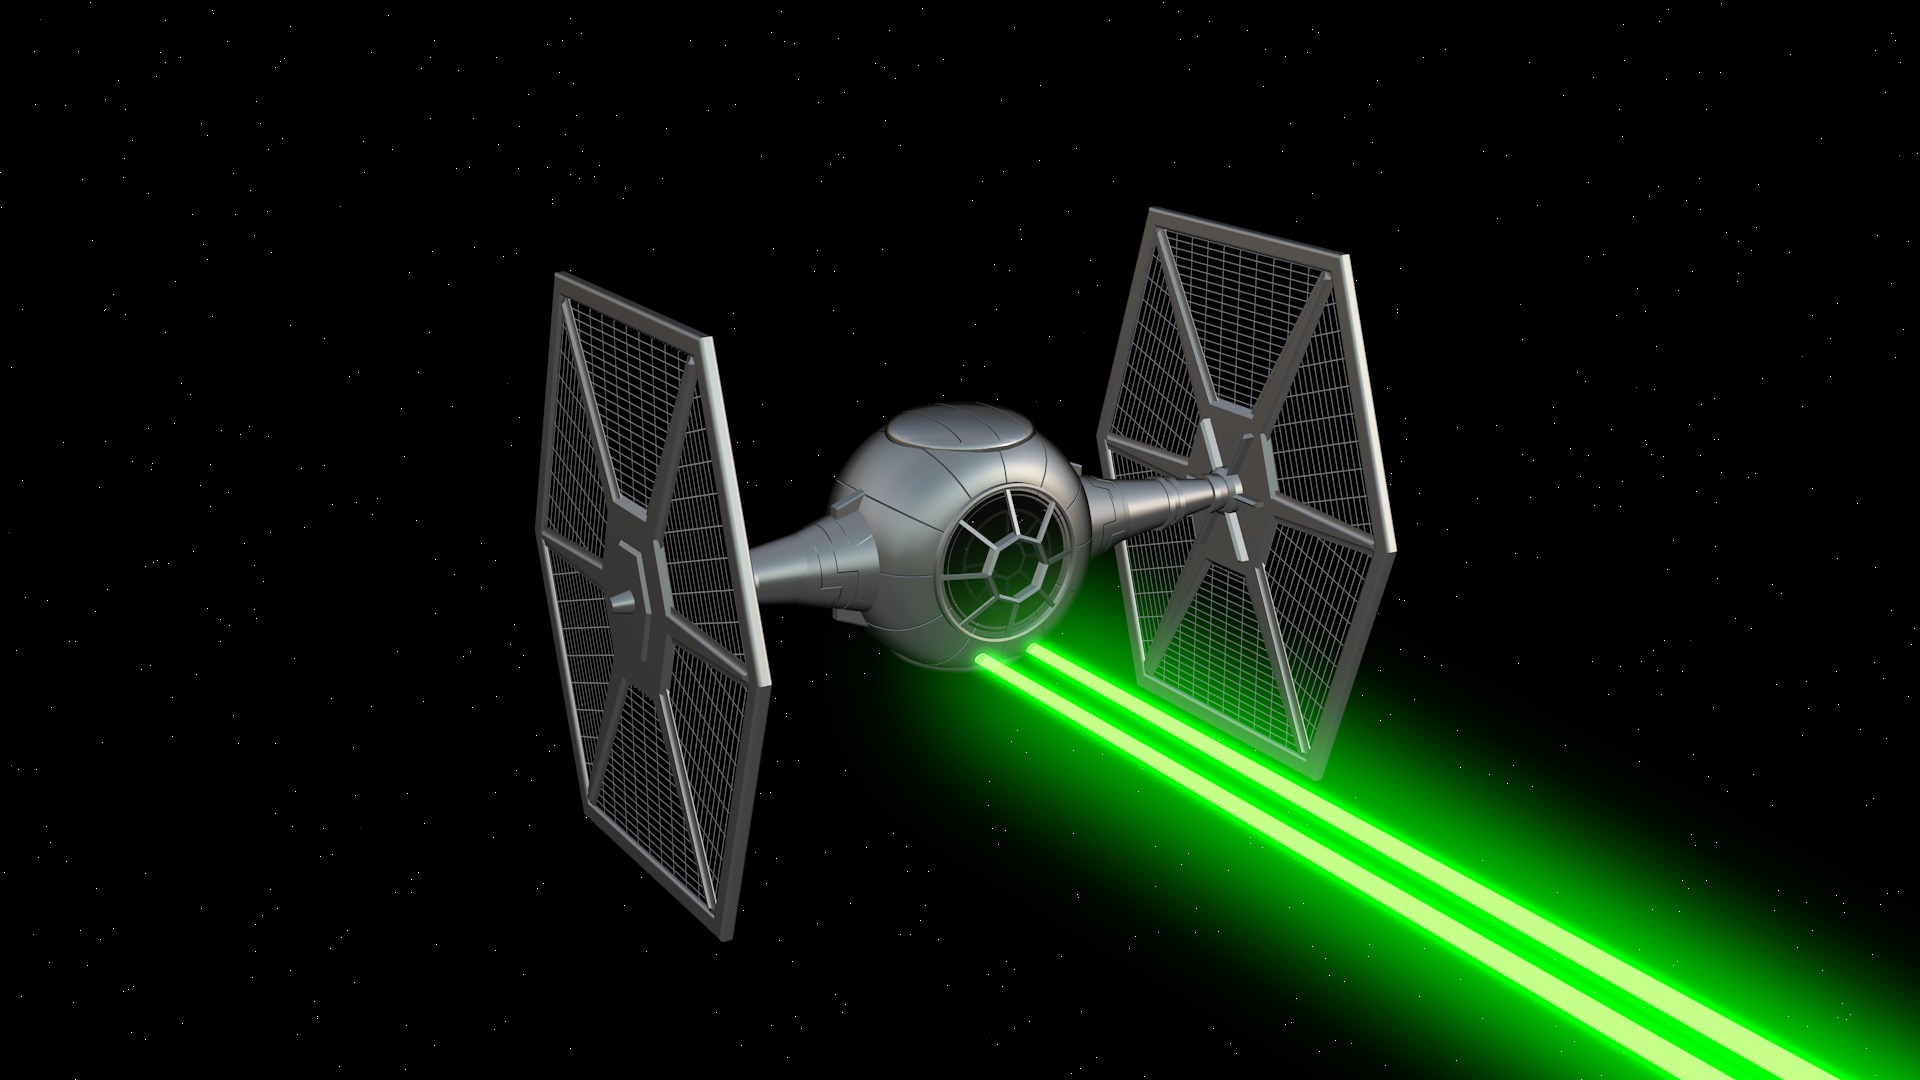 TIE Fighter 3D Model - made in Motion